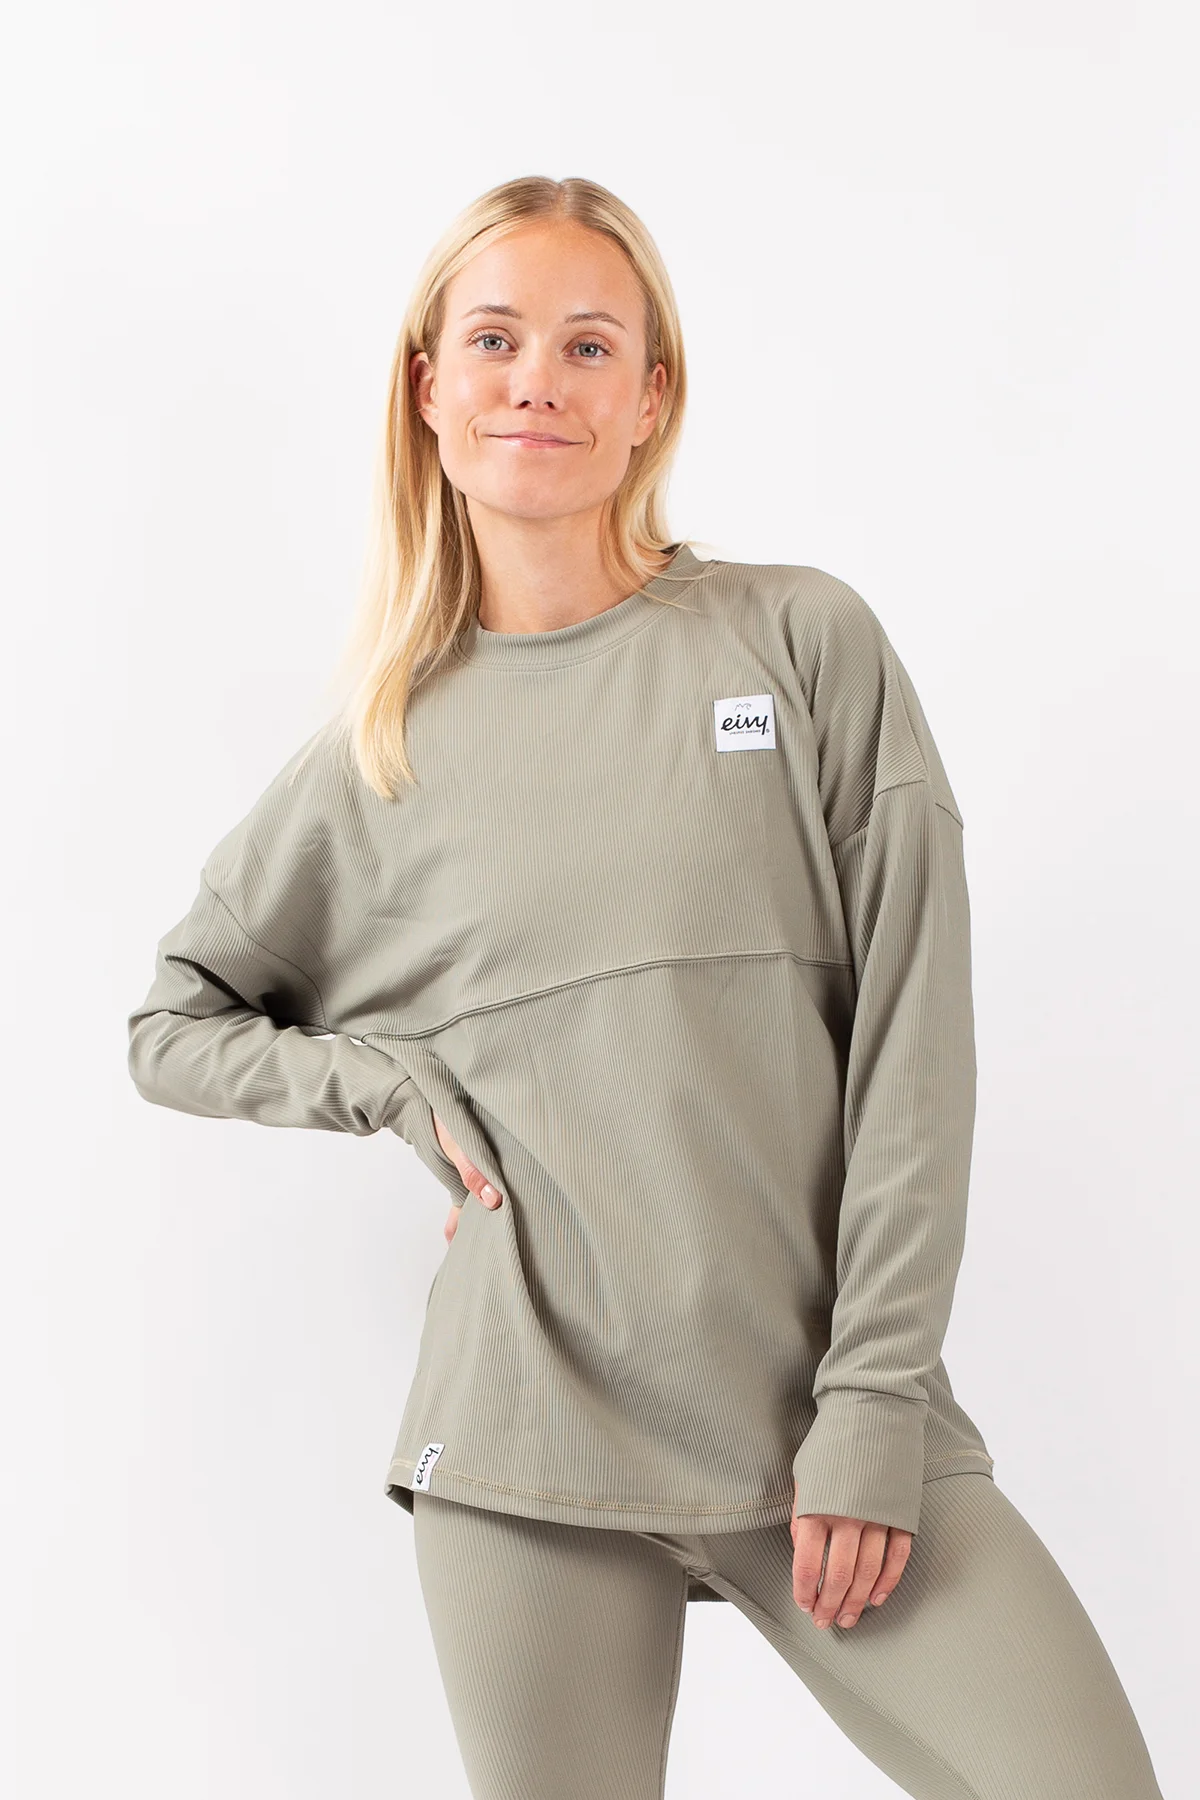 Base Layer tops and shirts for women